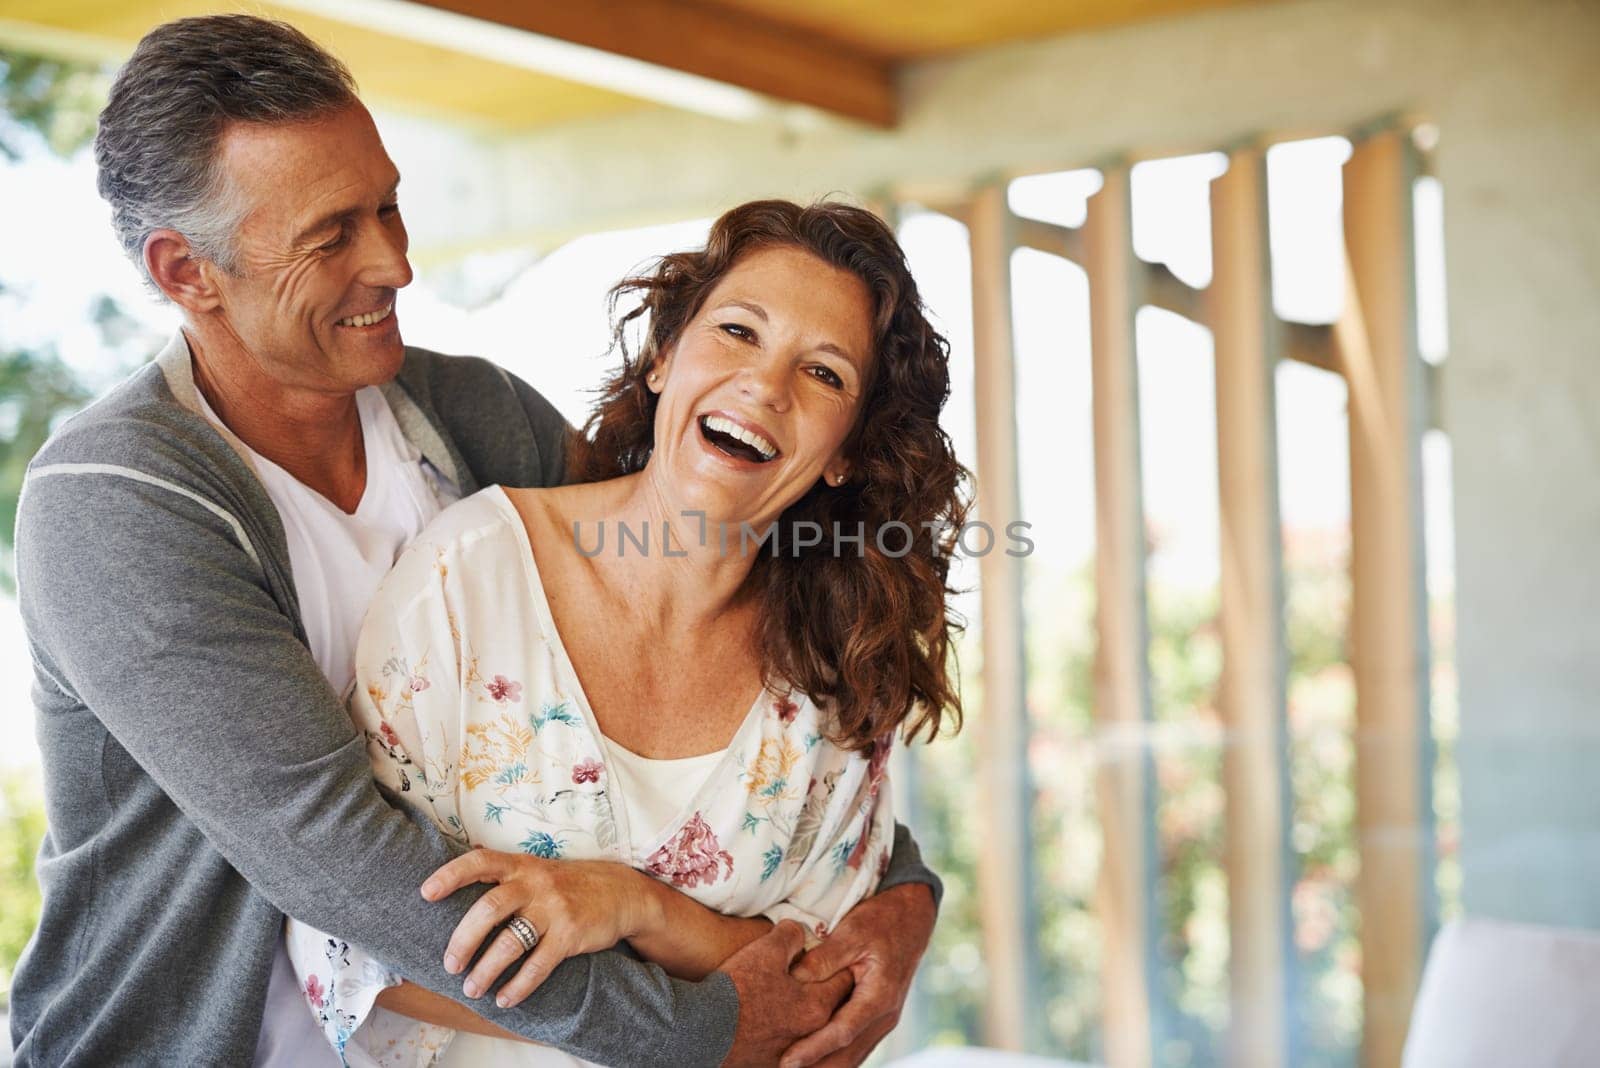 Laughing, portrait or mature couple hug in home for support, wellness or love for care, marriage or trust. Smile, fun or happy woman bonding with man in retirement, break or house to relax together.